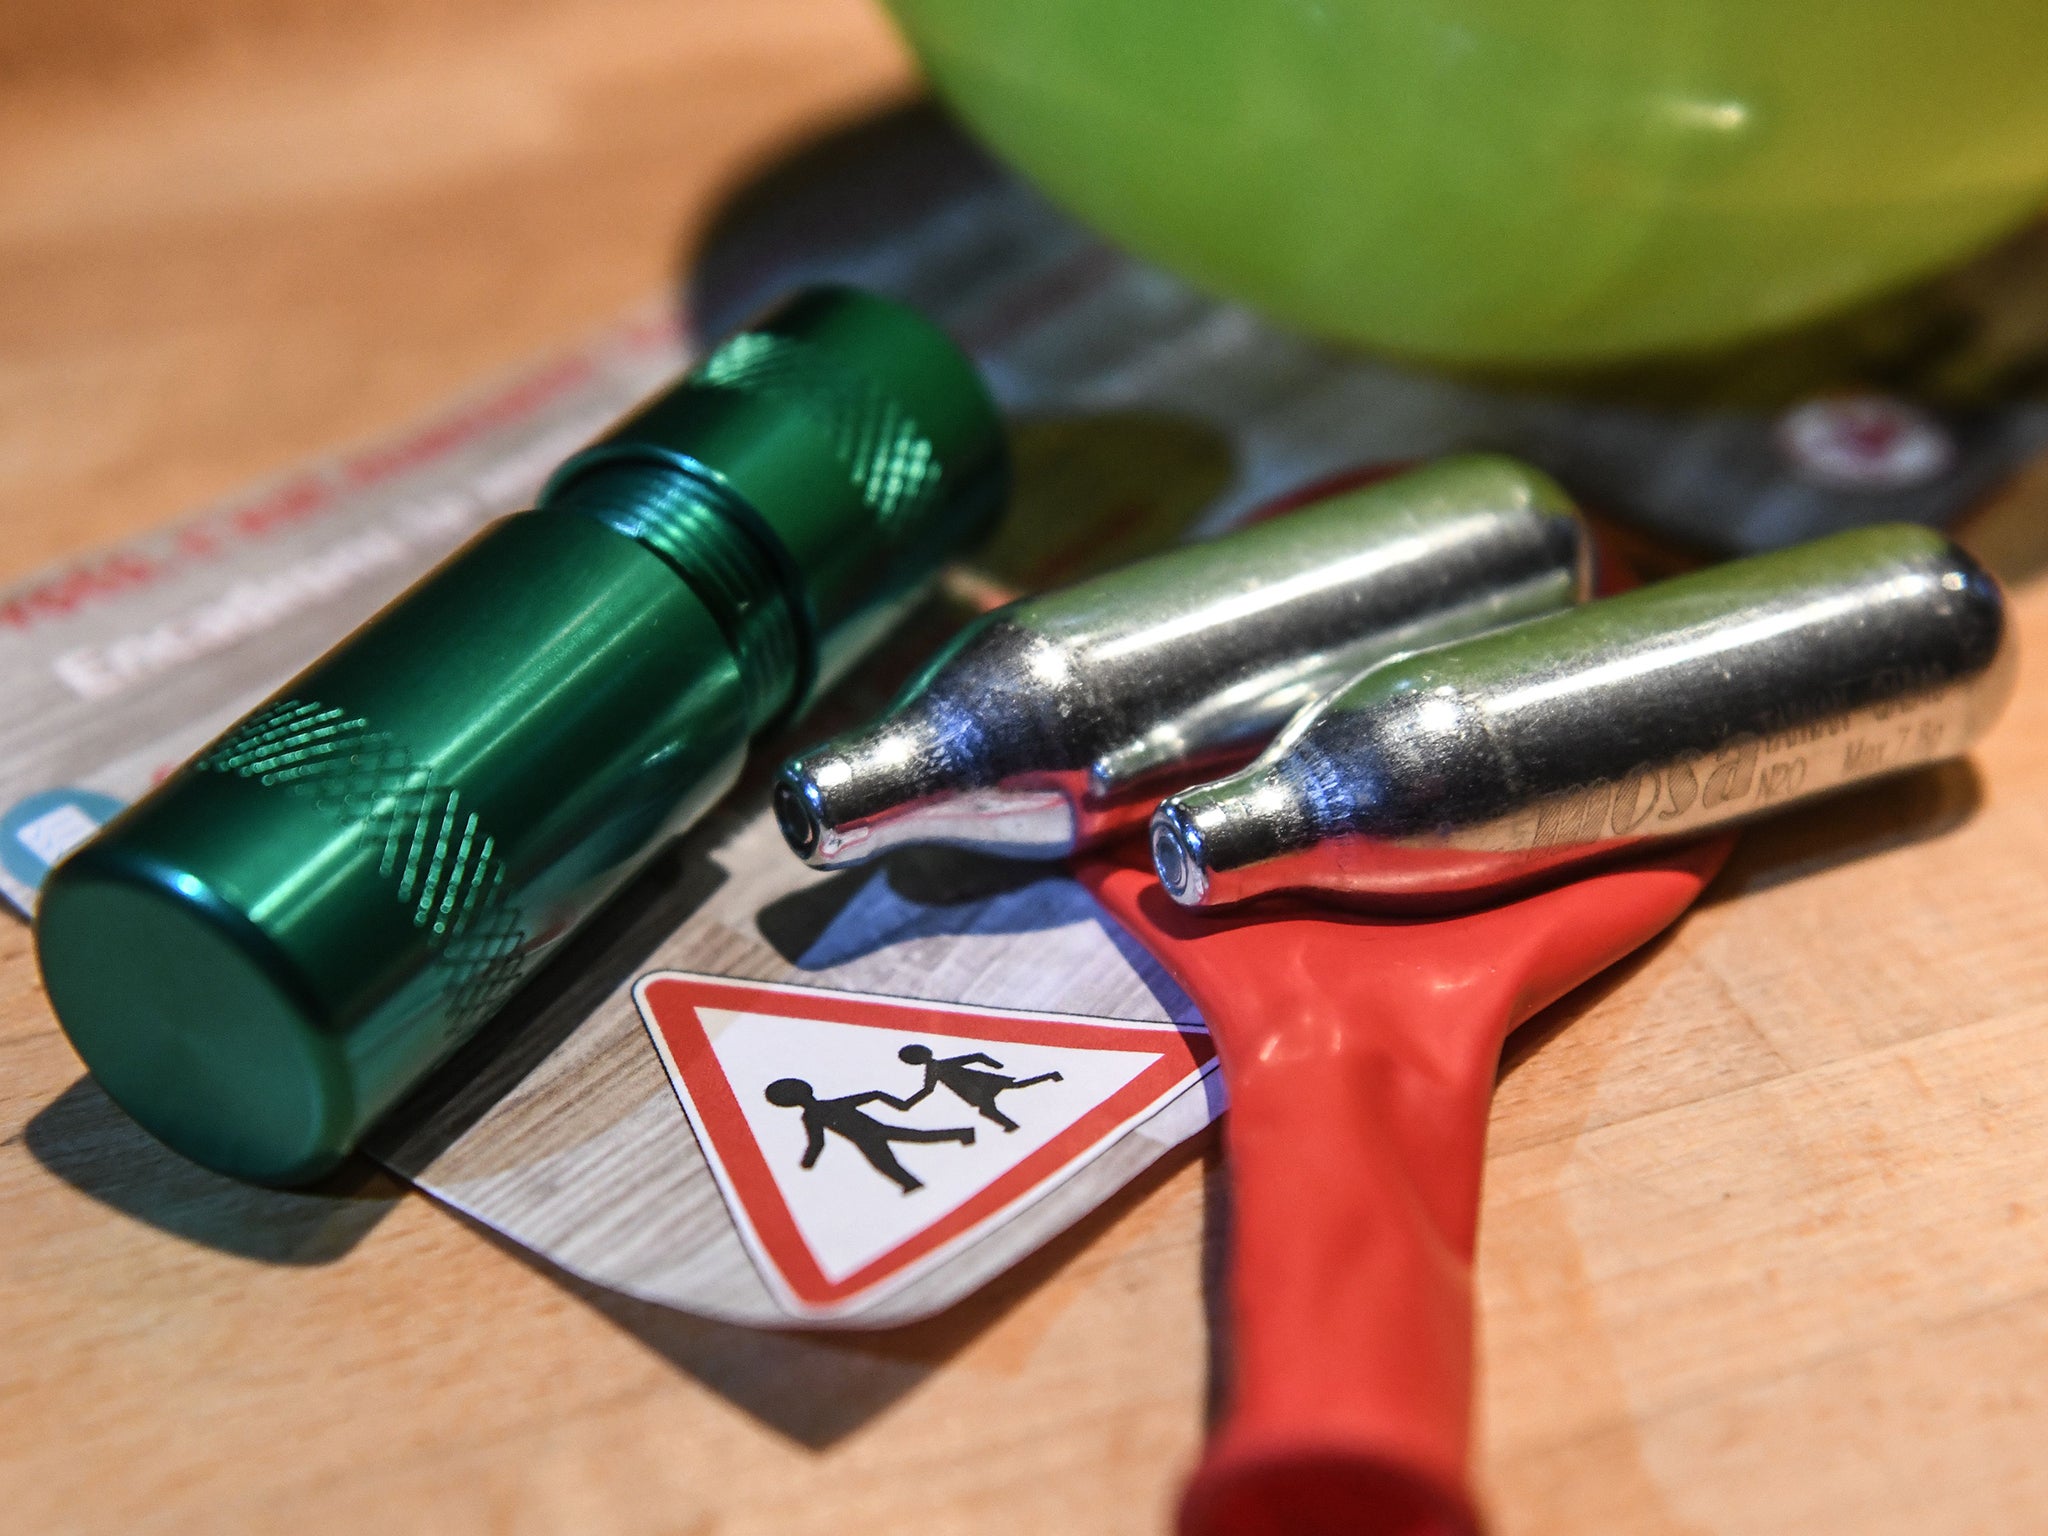 Balloons and canisters of nitrous oxide, commonly known as laughing gas, is now illegal